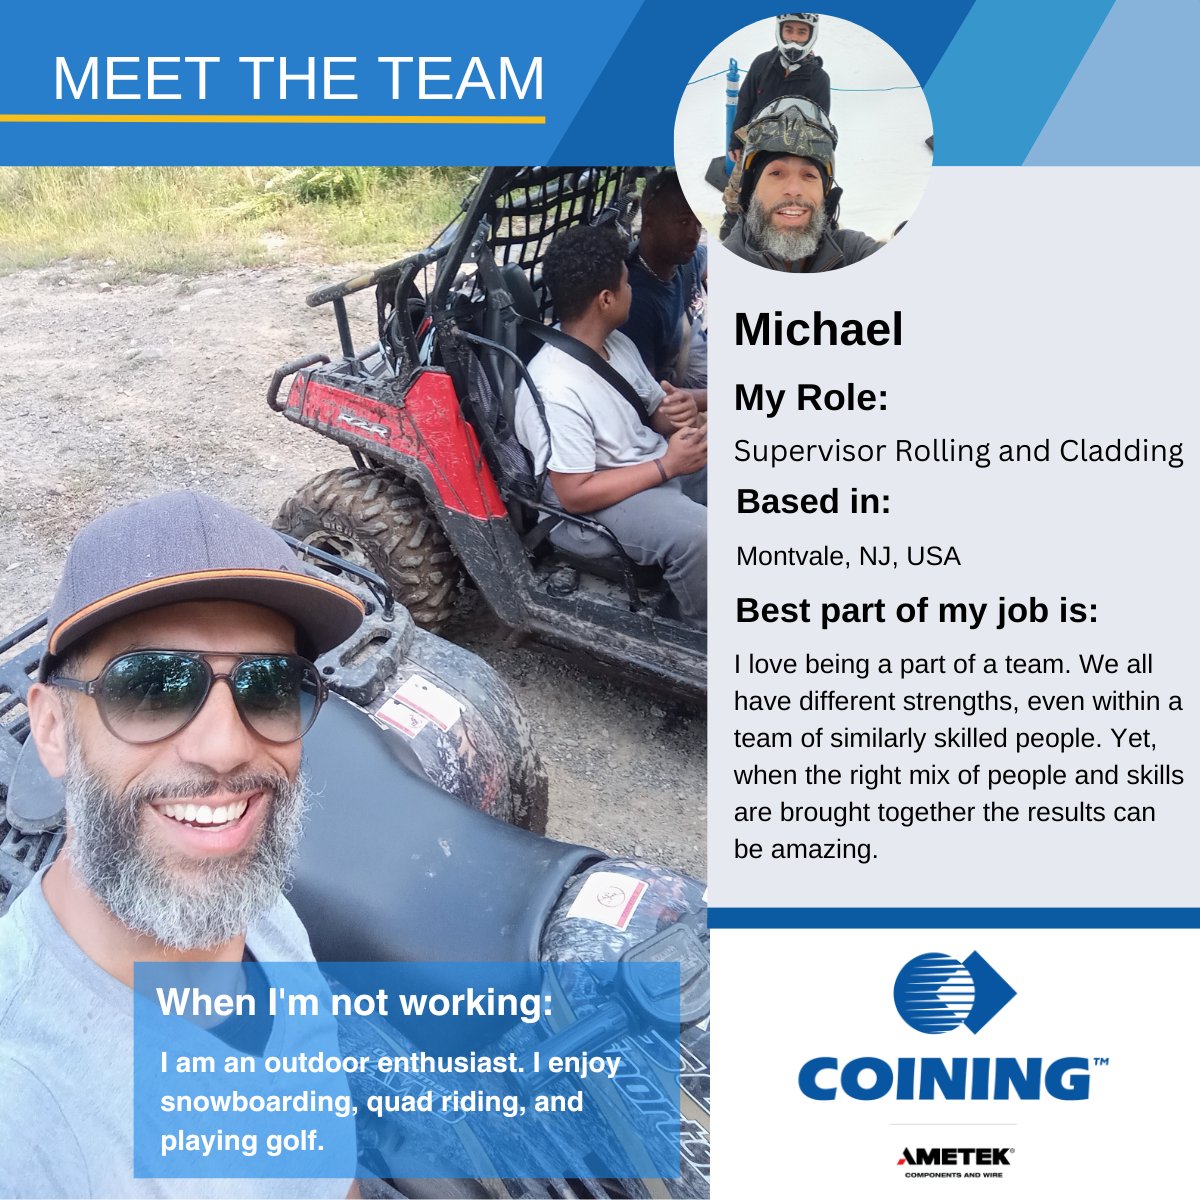 #MeetTheTeam 👋

Meet Michael, Supervisor Rolling and Cladding, who is an outdoor enthusiast!🏂🌳

💡Michael is passionate about being a part of a team that has diverse skills and talents because together it produces the best results. 

#PeopleFirst #GreatTeam #TeamWork